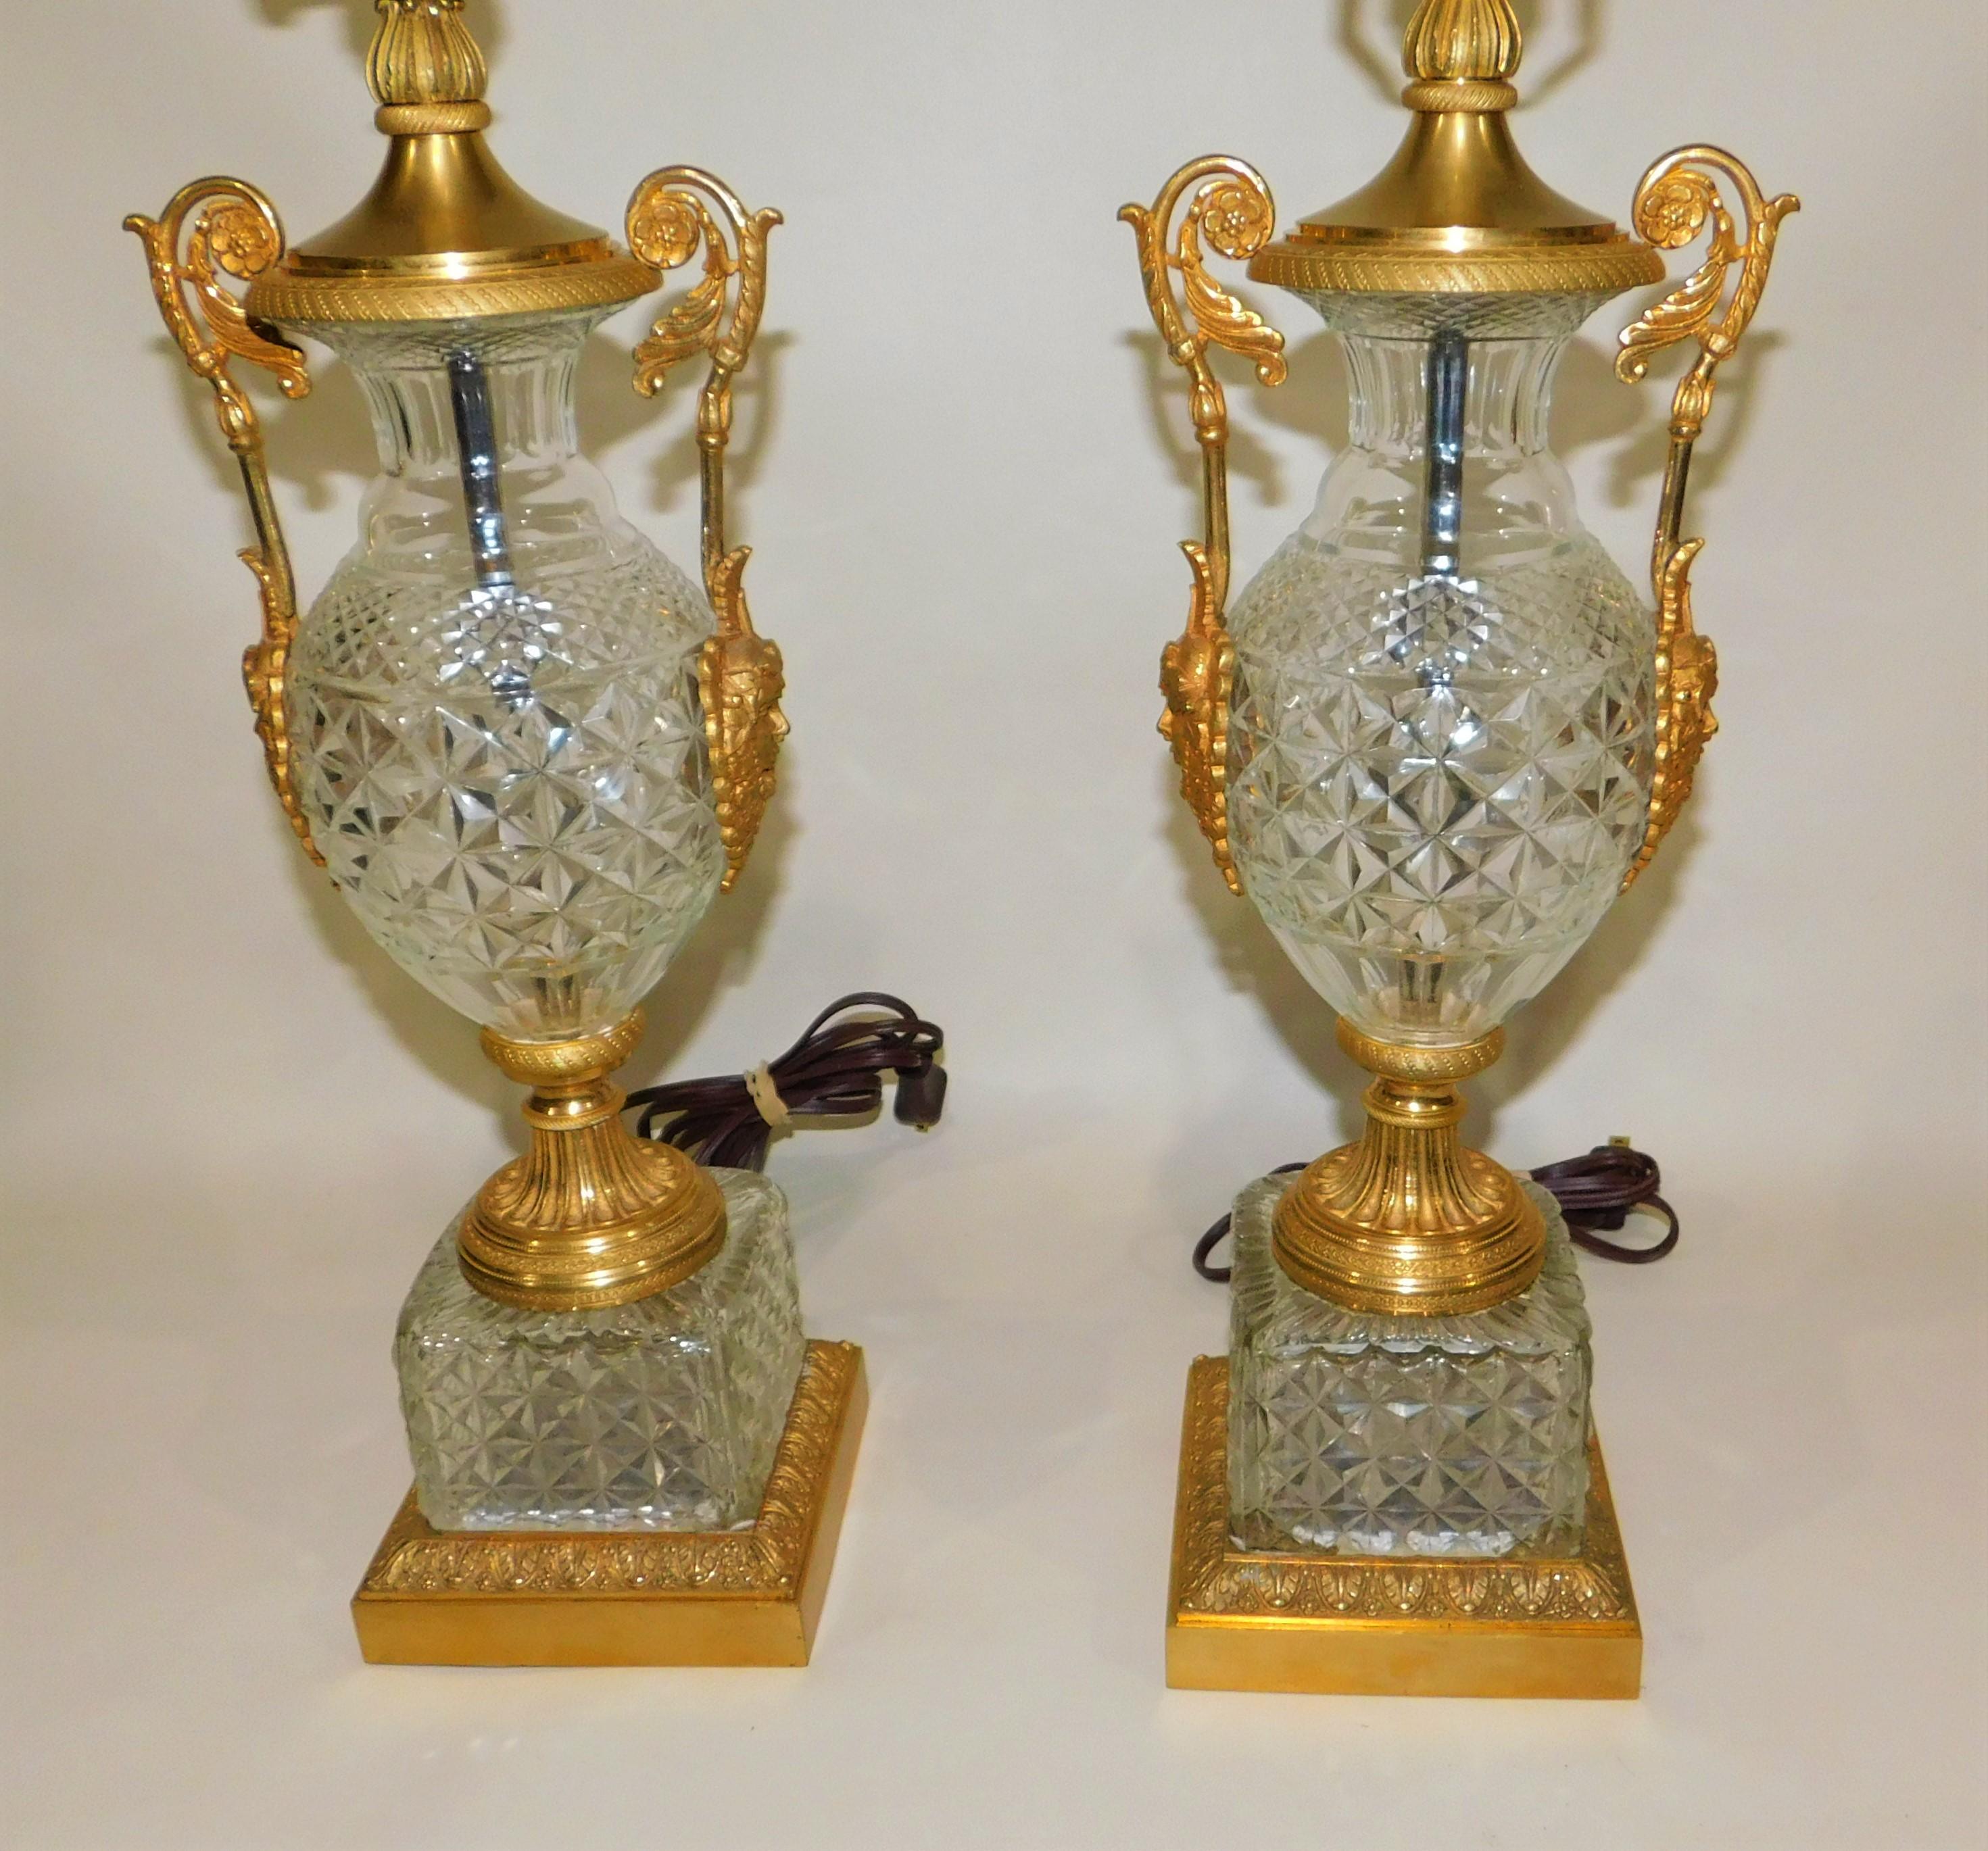 Pair of circa 1920 Austrian cut crystal glass and gold gilt bronze table lamps. Each lamp has two figures on each of the Roman wine God Bacchus on them. Each lamp measures 27.5 inches high to the top of the acorn finials, the shades are 17 inches